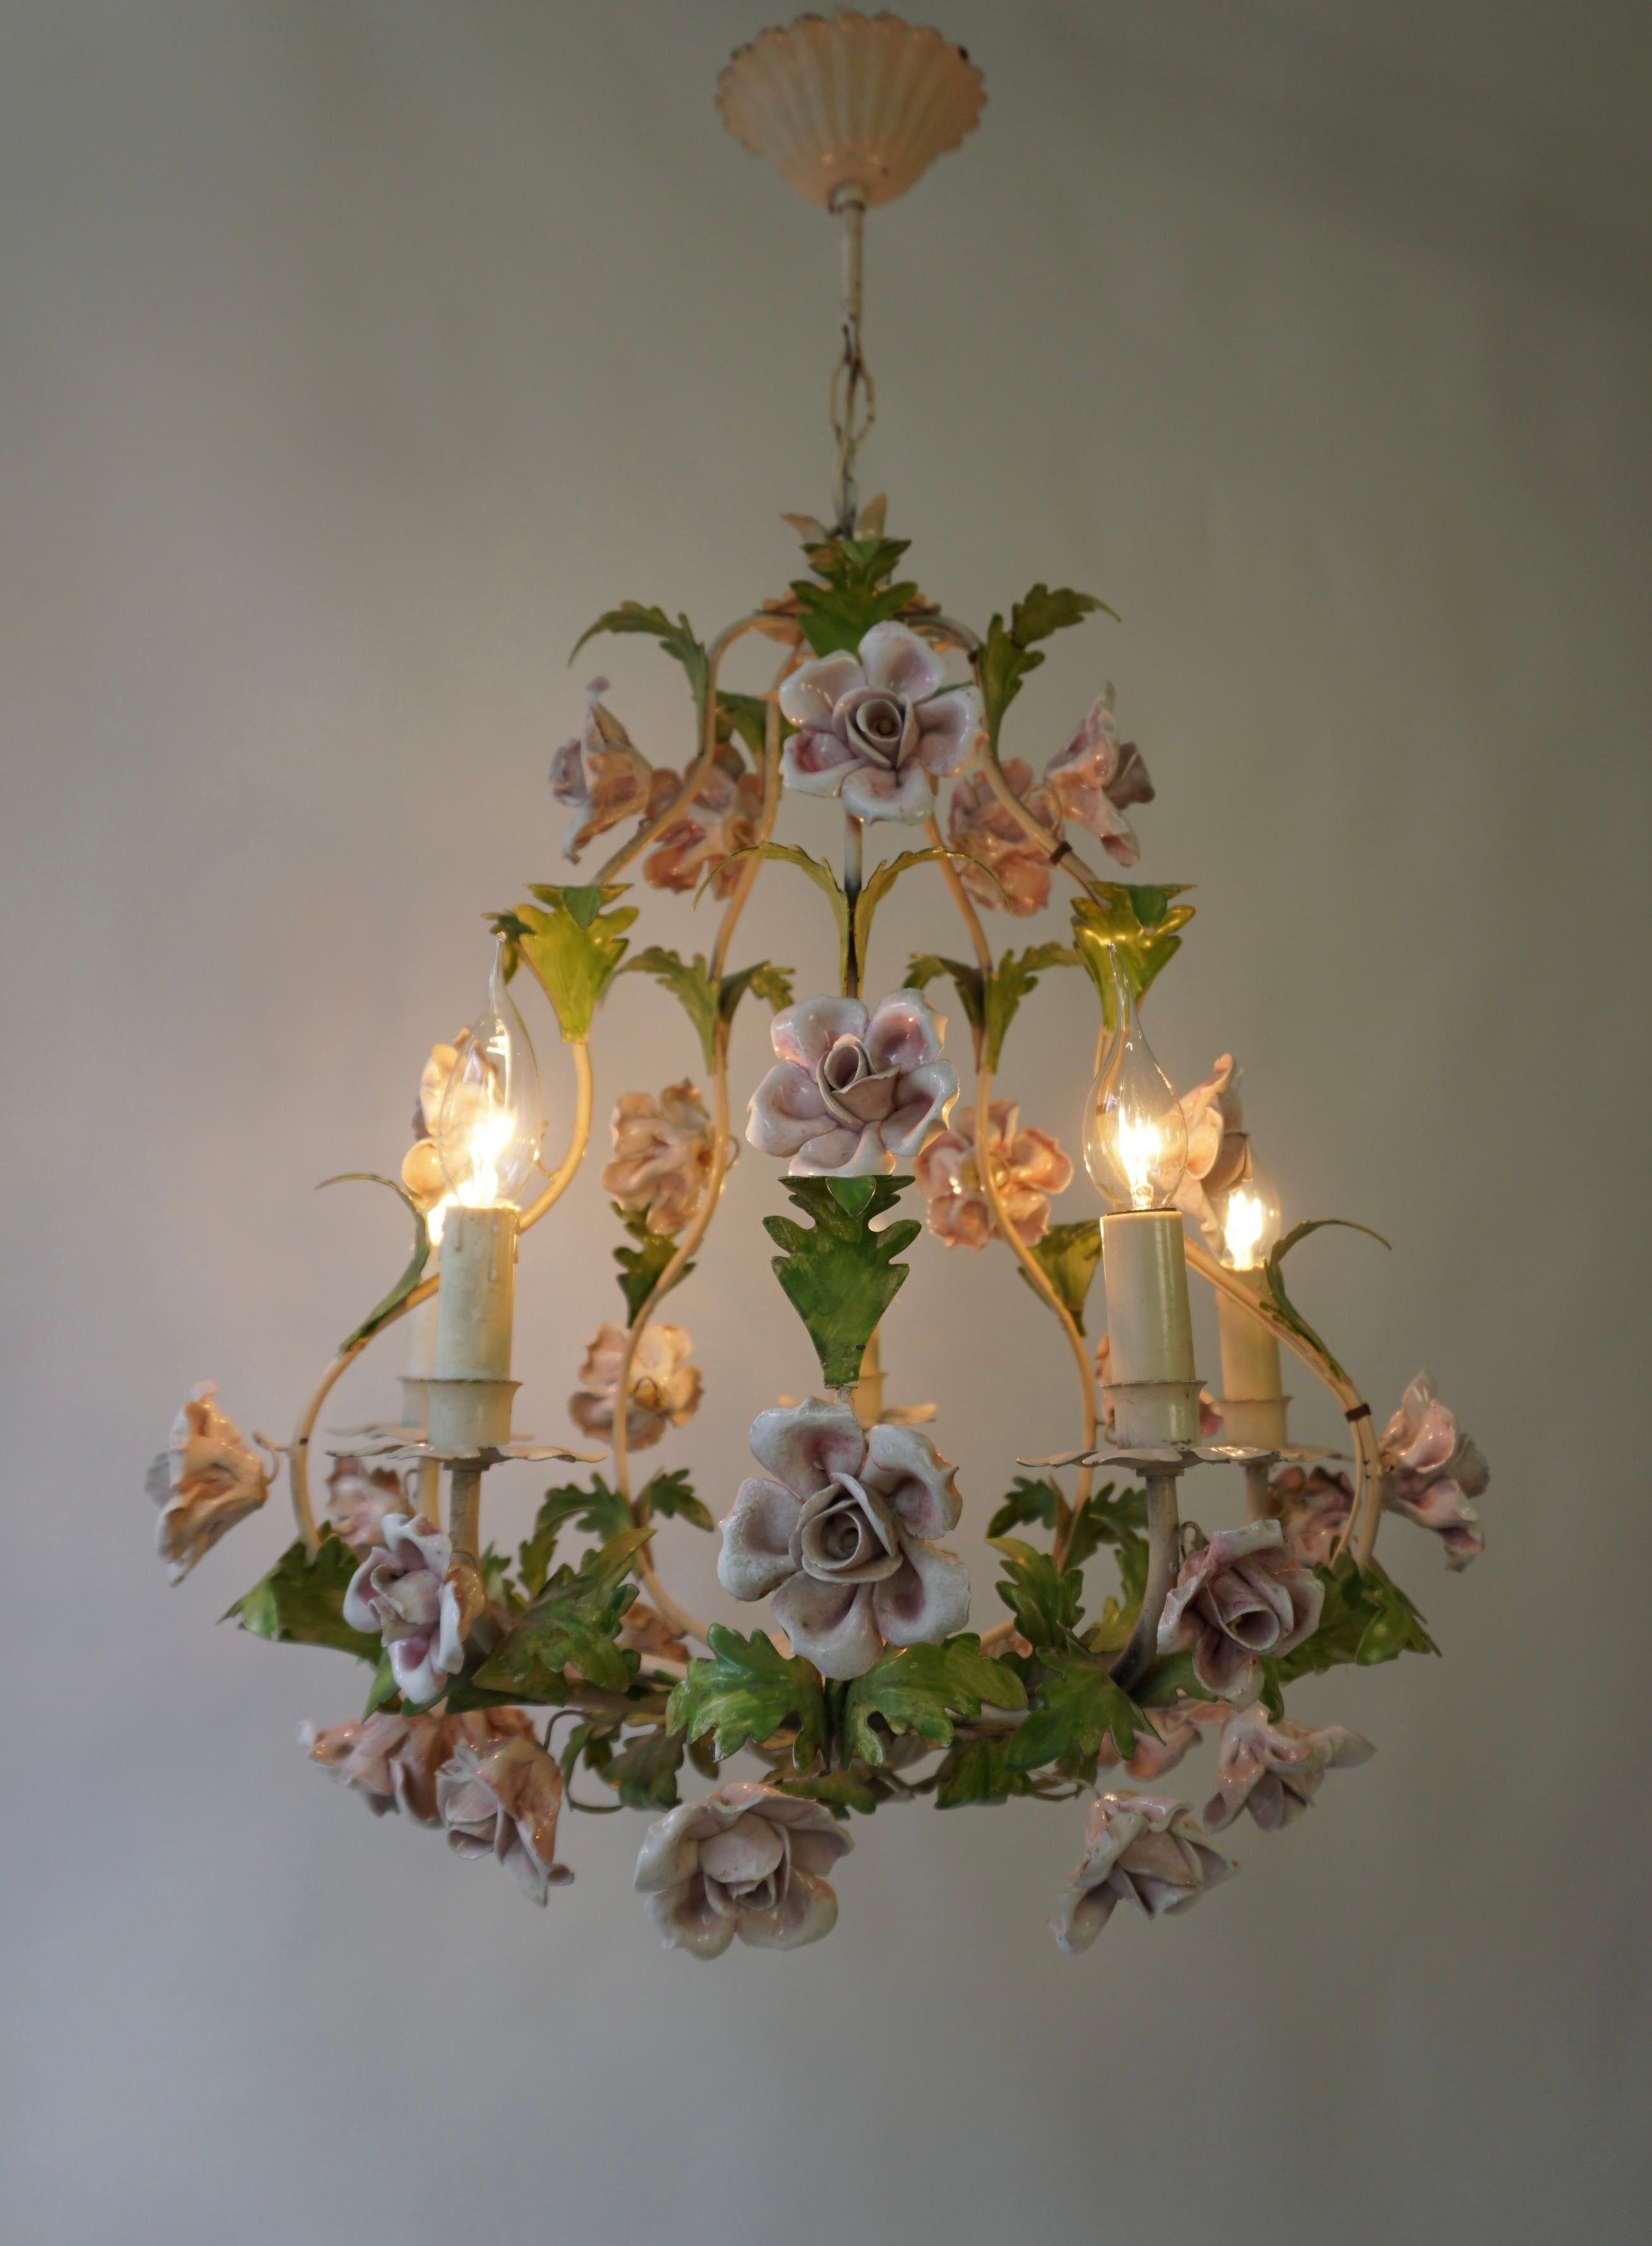 An Italian handcut tole chandelier. The cage form metal frame ornamented with tole leaves, and pink-white porcelain flowers. 

The chandelier has five sockets for small incandescent lamps with screw base or E14 type LEDs. It is possible to install